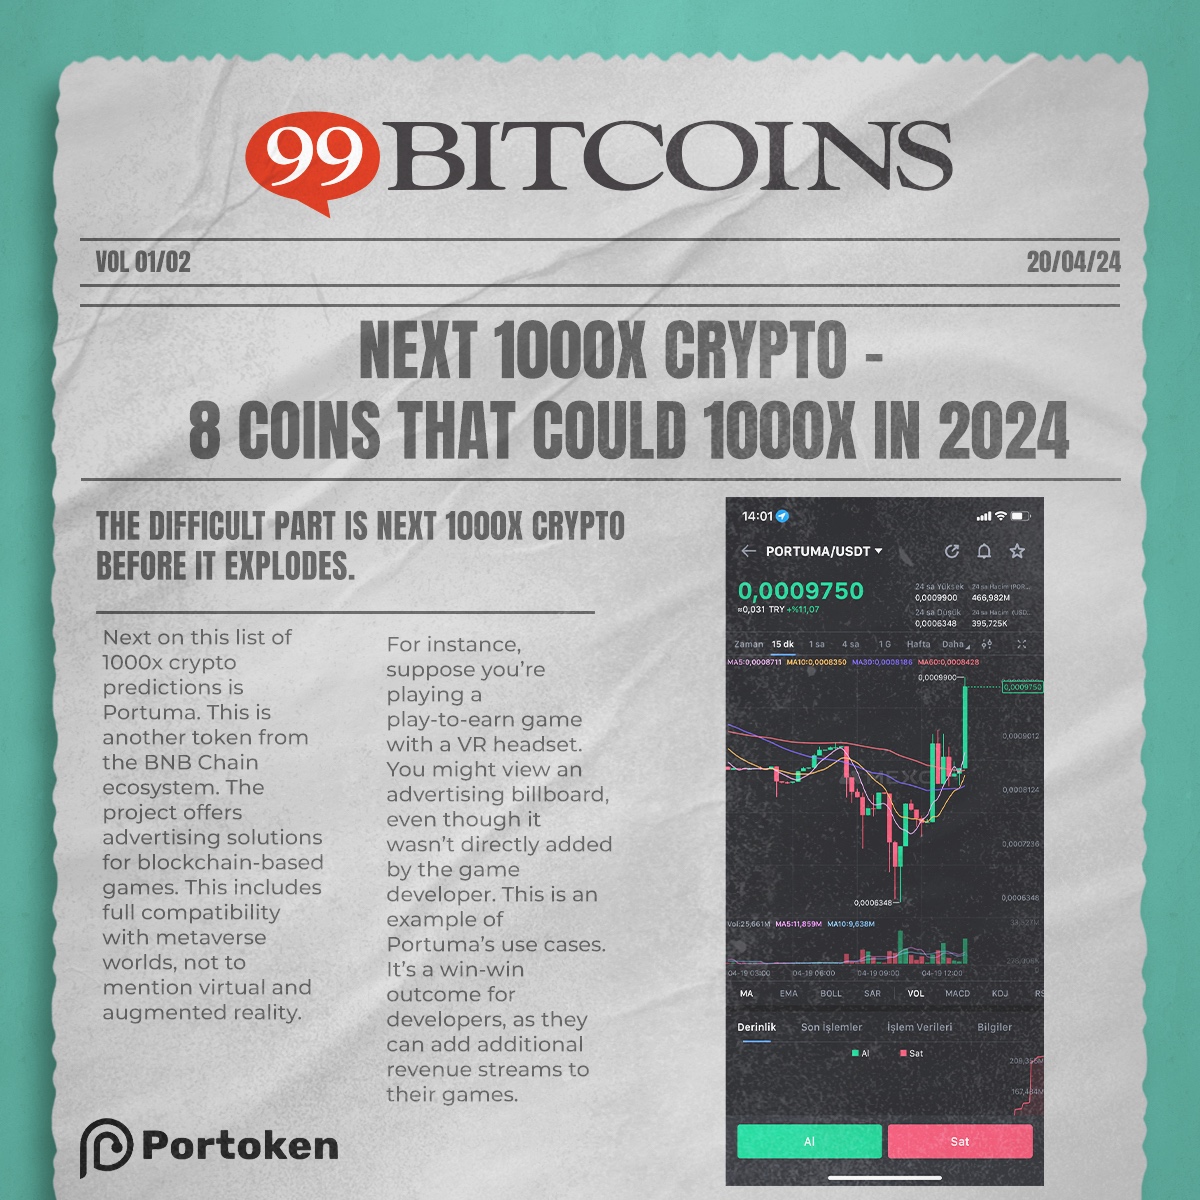 According to 99Bitcoins, we are among the 8 coins that have the potential to reach 1000X in 2024! ''Next 1000x Crypto – 8 Coins That Could 1000x in 2024''🚀 thanks @99BitcoinsHQ 😍 Details: 99bitcoins.com/cryptocurrency…